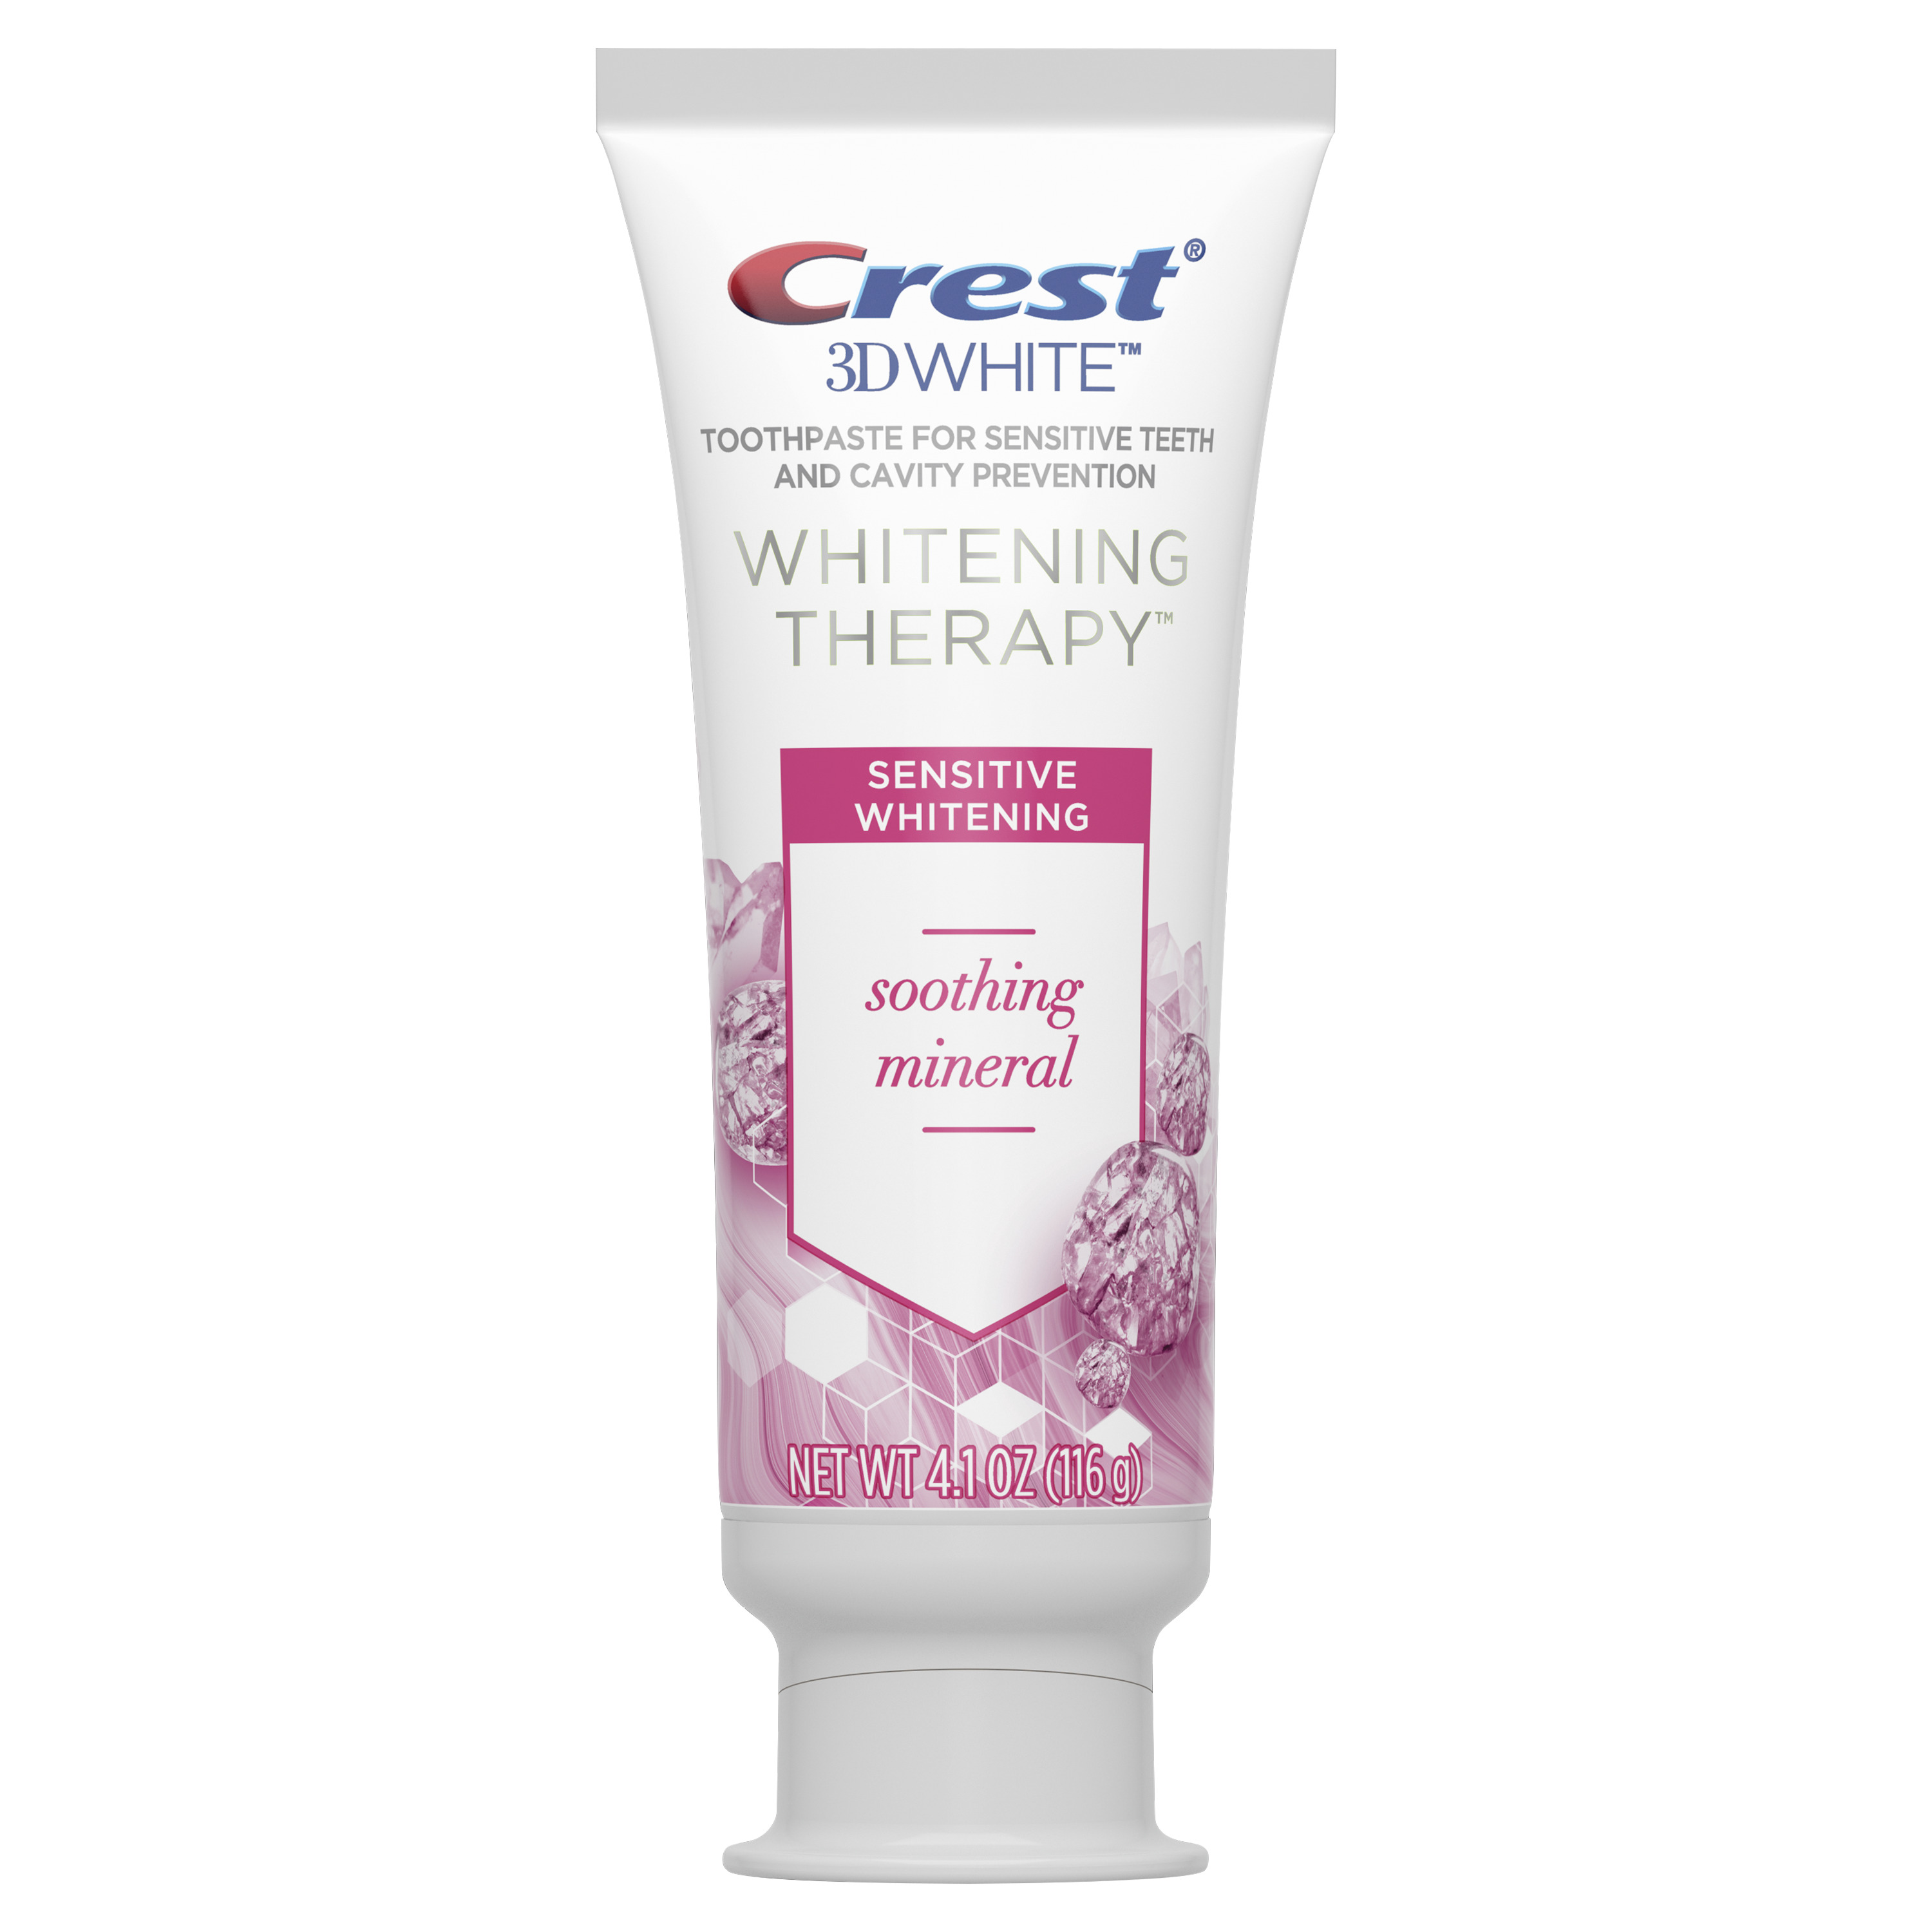 Crest 3D White Whitening Therapy Sensitivity Care Toothpaste, 4.1 oz - image 1 of 8